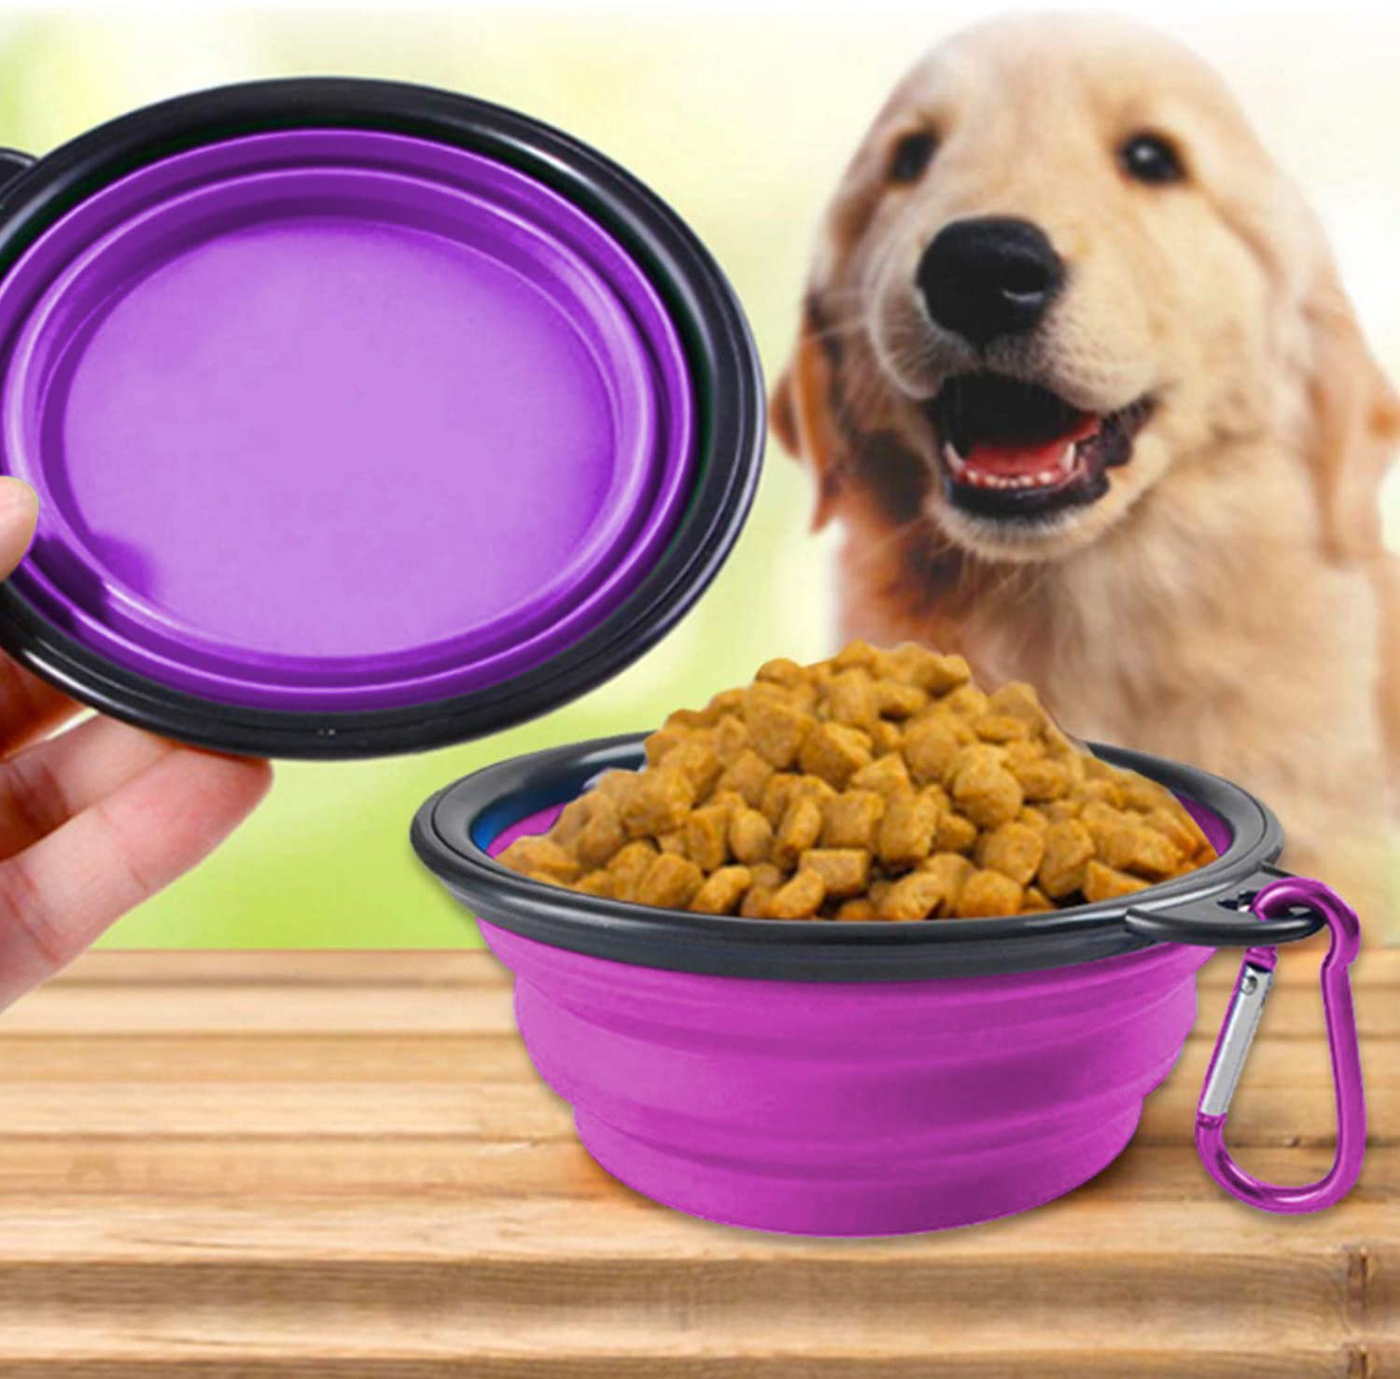 AYECEHI Portable Silicone Collapsible Pet Cat Bowls,[2 Pack] Foldable Expandable Water Feeding Travel Bowl Cup Dish for Pet Dogs and Cats - with 2 Pack Carabiners